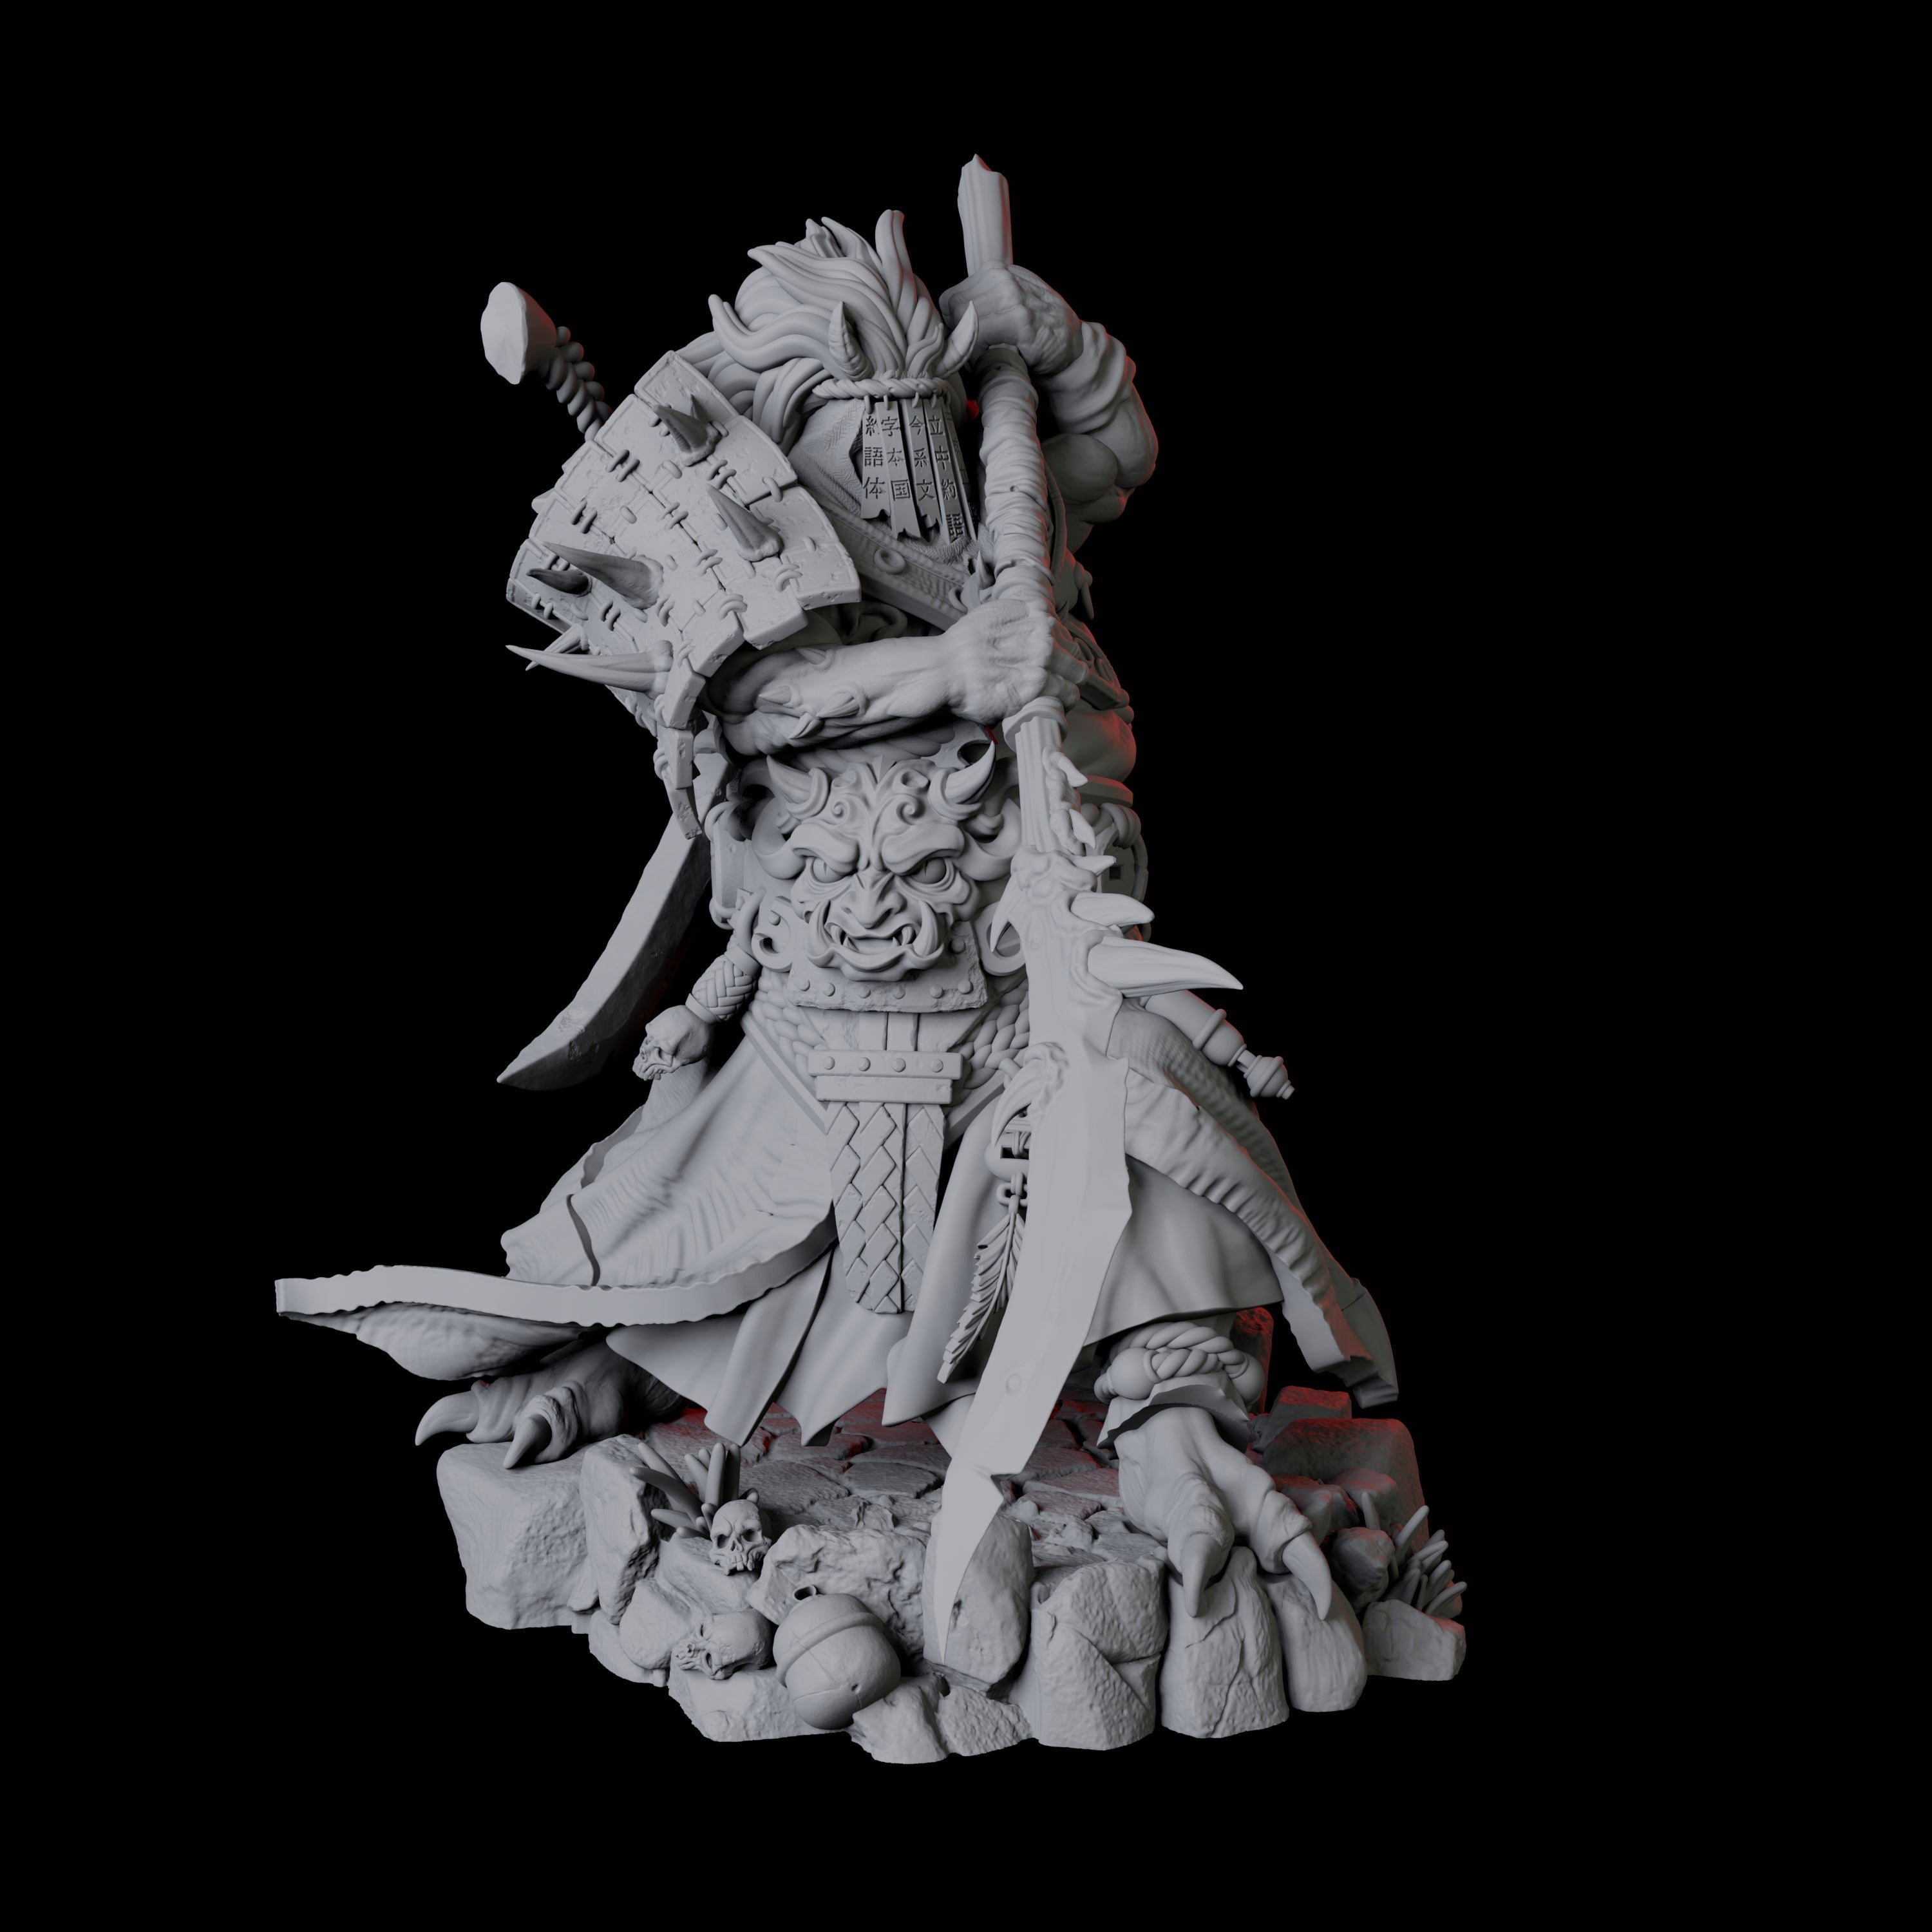 Four Towering Oni Demons Miniature for Dungeons and Dragons, Pathfinder or other TTRPGs